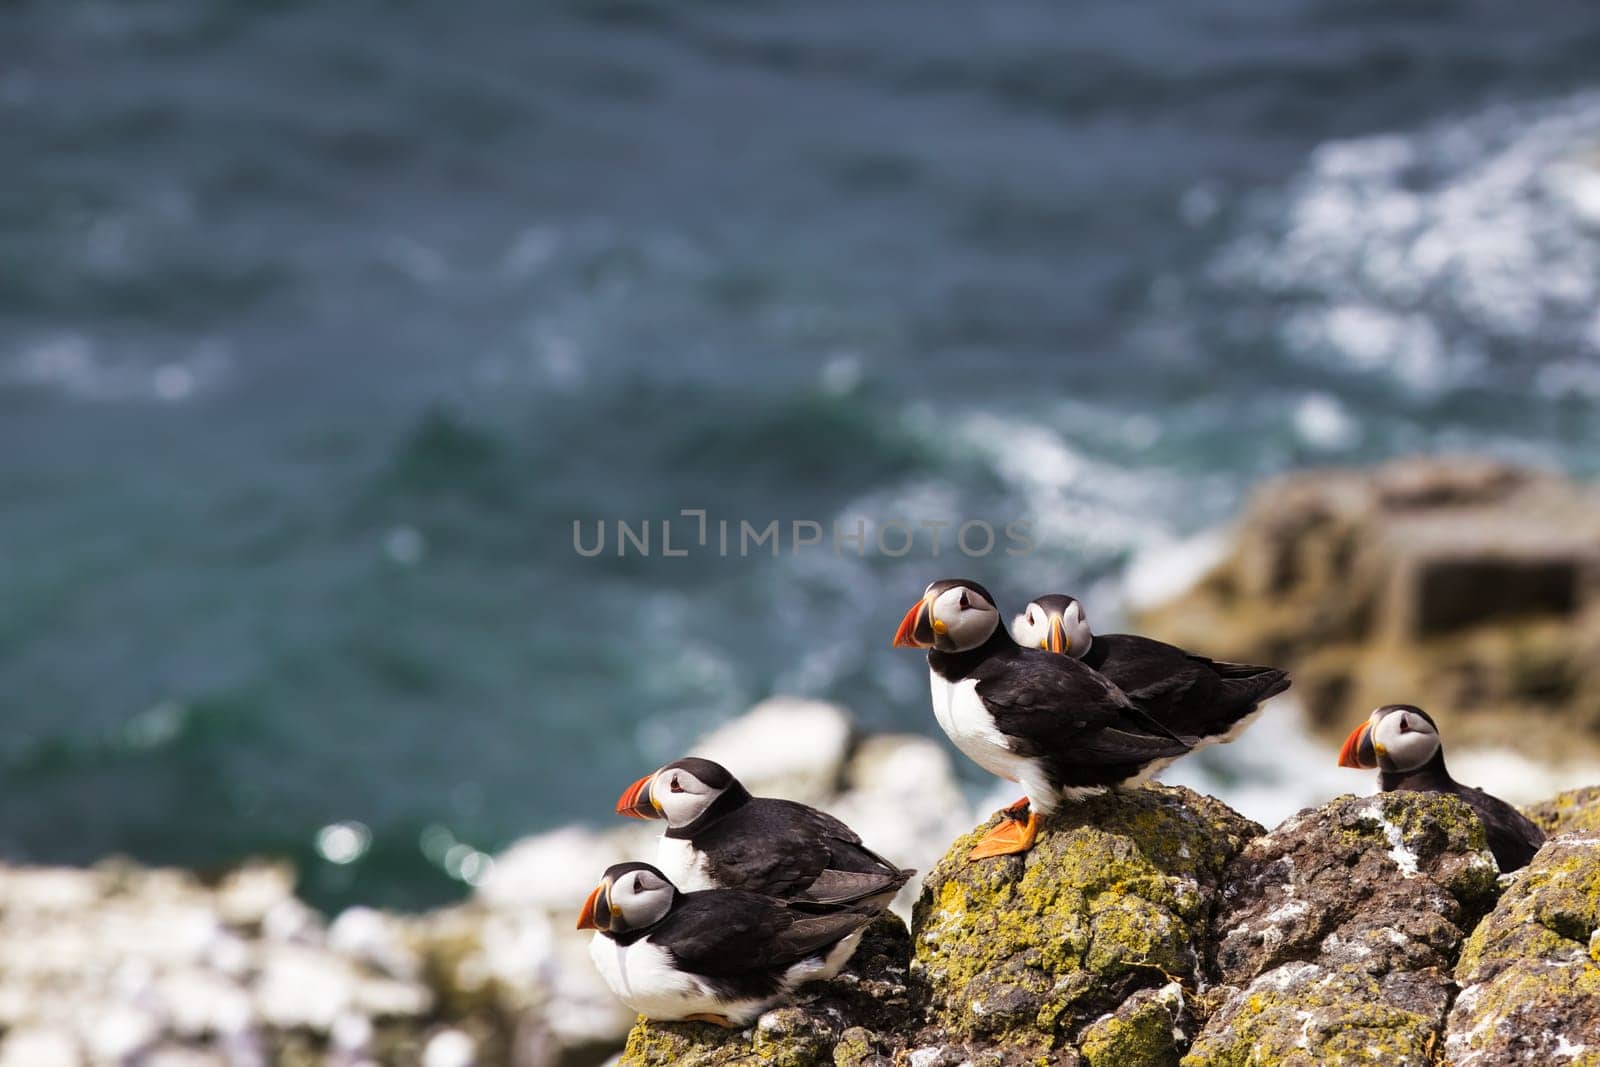 Immerse yourself in the mesmerizing world of puffins with this spellbinding photograph. Showcasing a quintet of puffins perched on a coastal rock, all facing in the same direction, the image evokes a collective focus, curiosity, or perhaps even anticipation. The coordinated gaze of these charming seabirds, set against the soothing backdrop of the ocean, creates a compelling narrative open to interpretation. Ideal for adding a touch of mystery, unity, and natural beauty to any environment